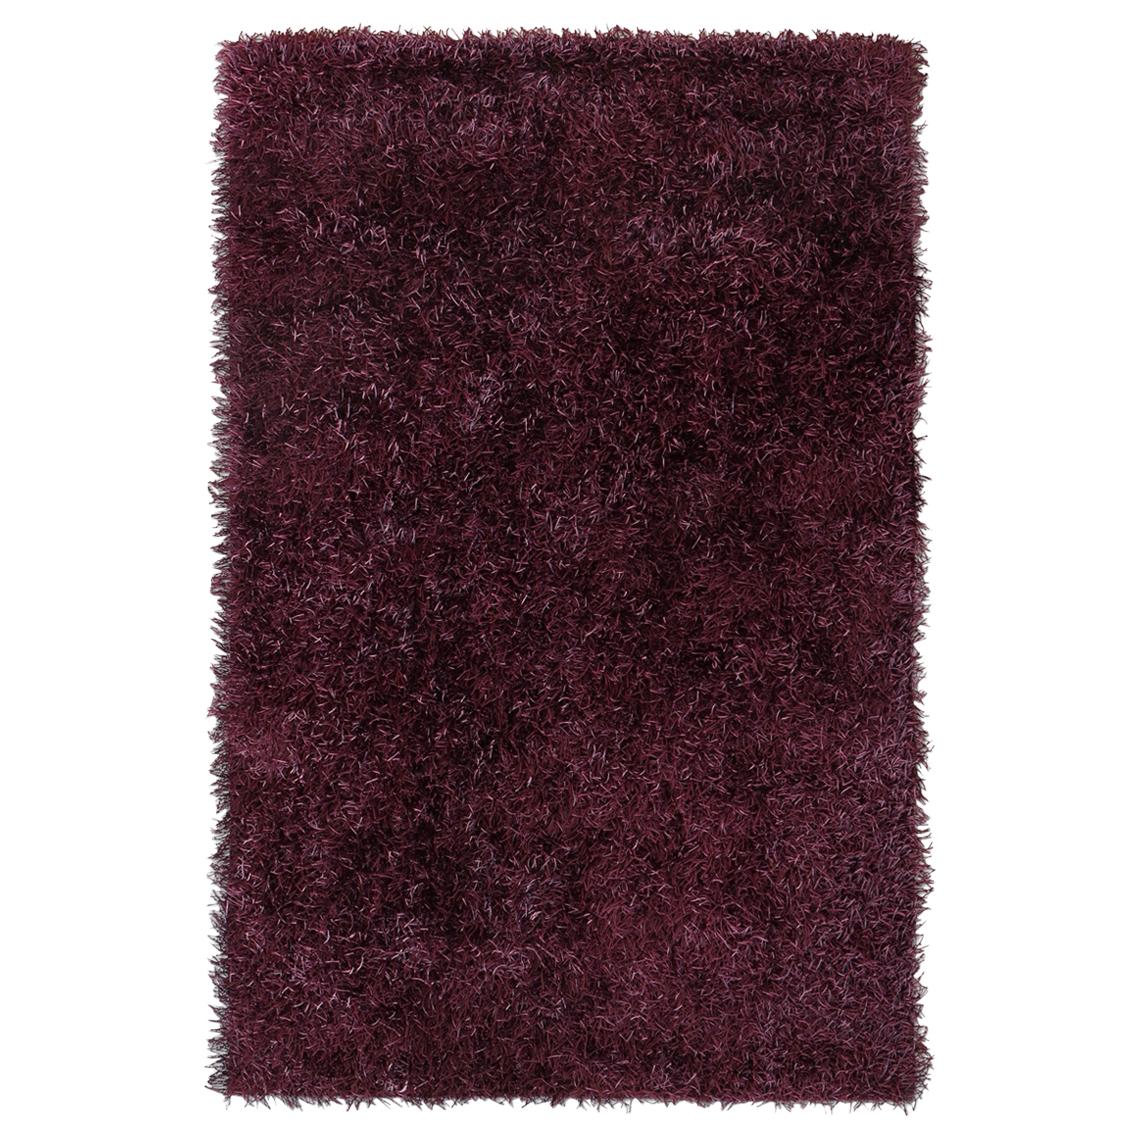 Contemporary Soft Welcoming Purple Rug by Deanna Comellini In Stock 170x240 cm